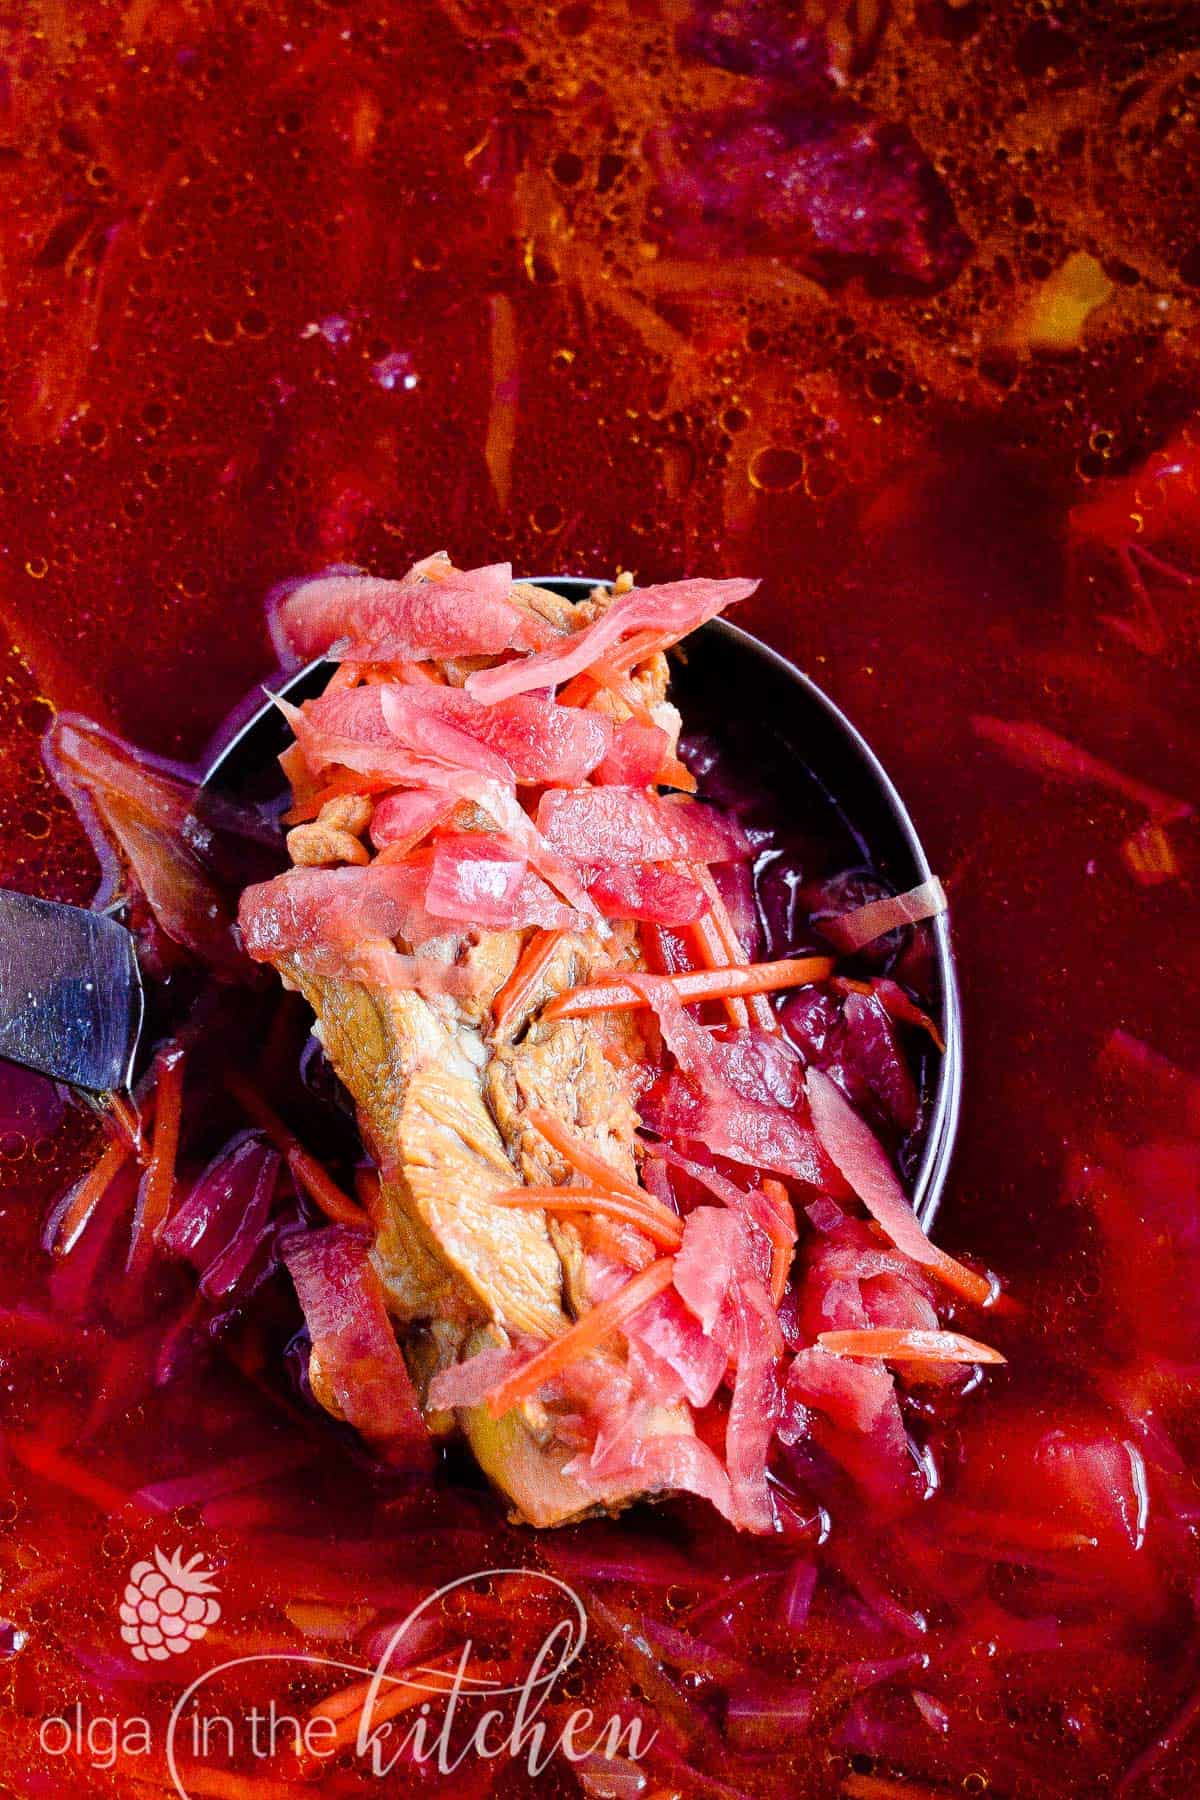 This Classic Red Borscht with Ribs (beet soup) is a traditional Ukrainian dish, loaded with vegetables such as potatoes, beet, cabbage, carrots and more. This hearty soup is very popular and loved by so many all around the world. | olgainthekitchen.com